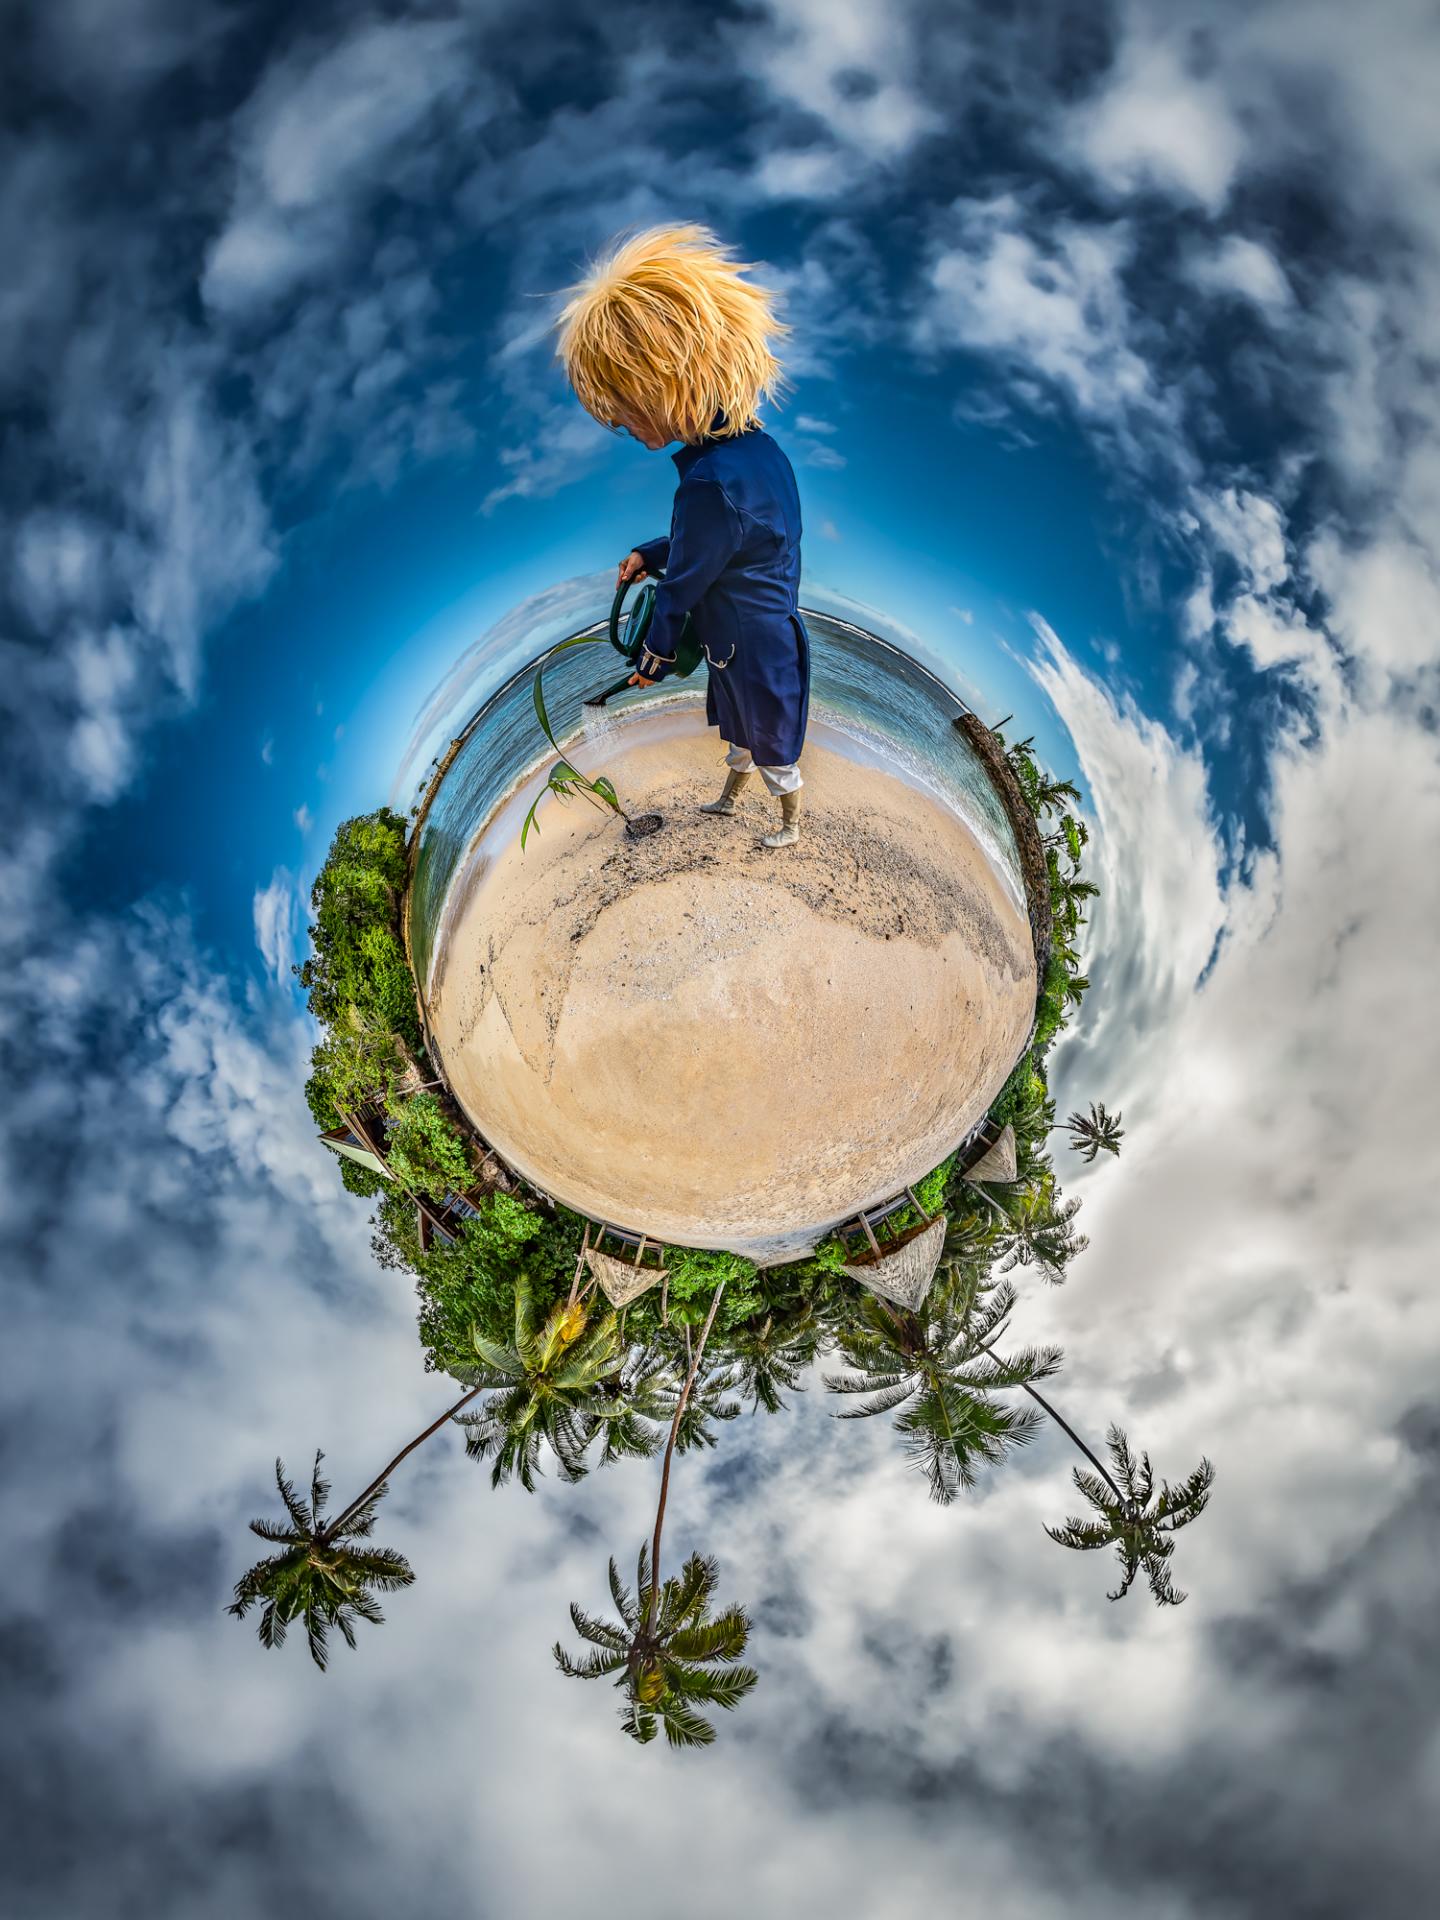 New York Photography Awards Winner - Planets of a Tiny Prince